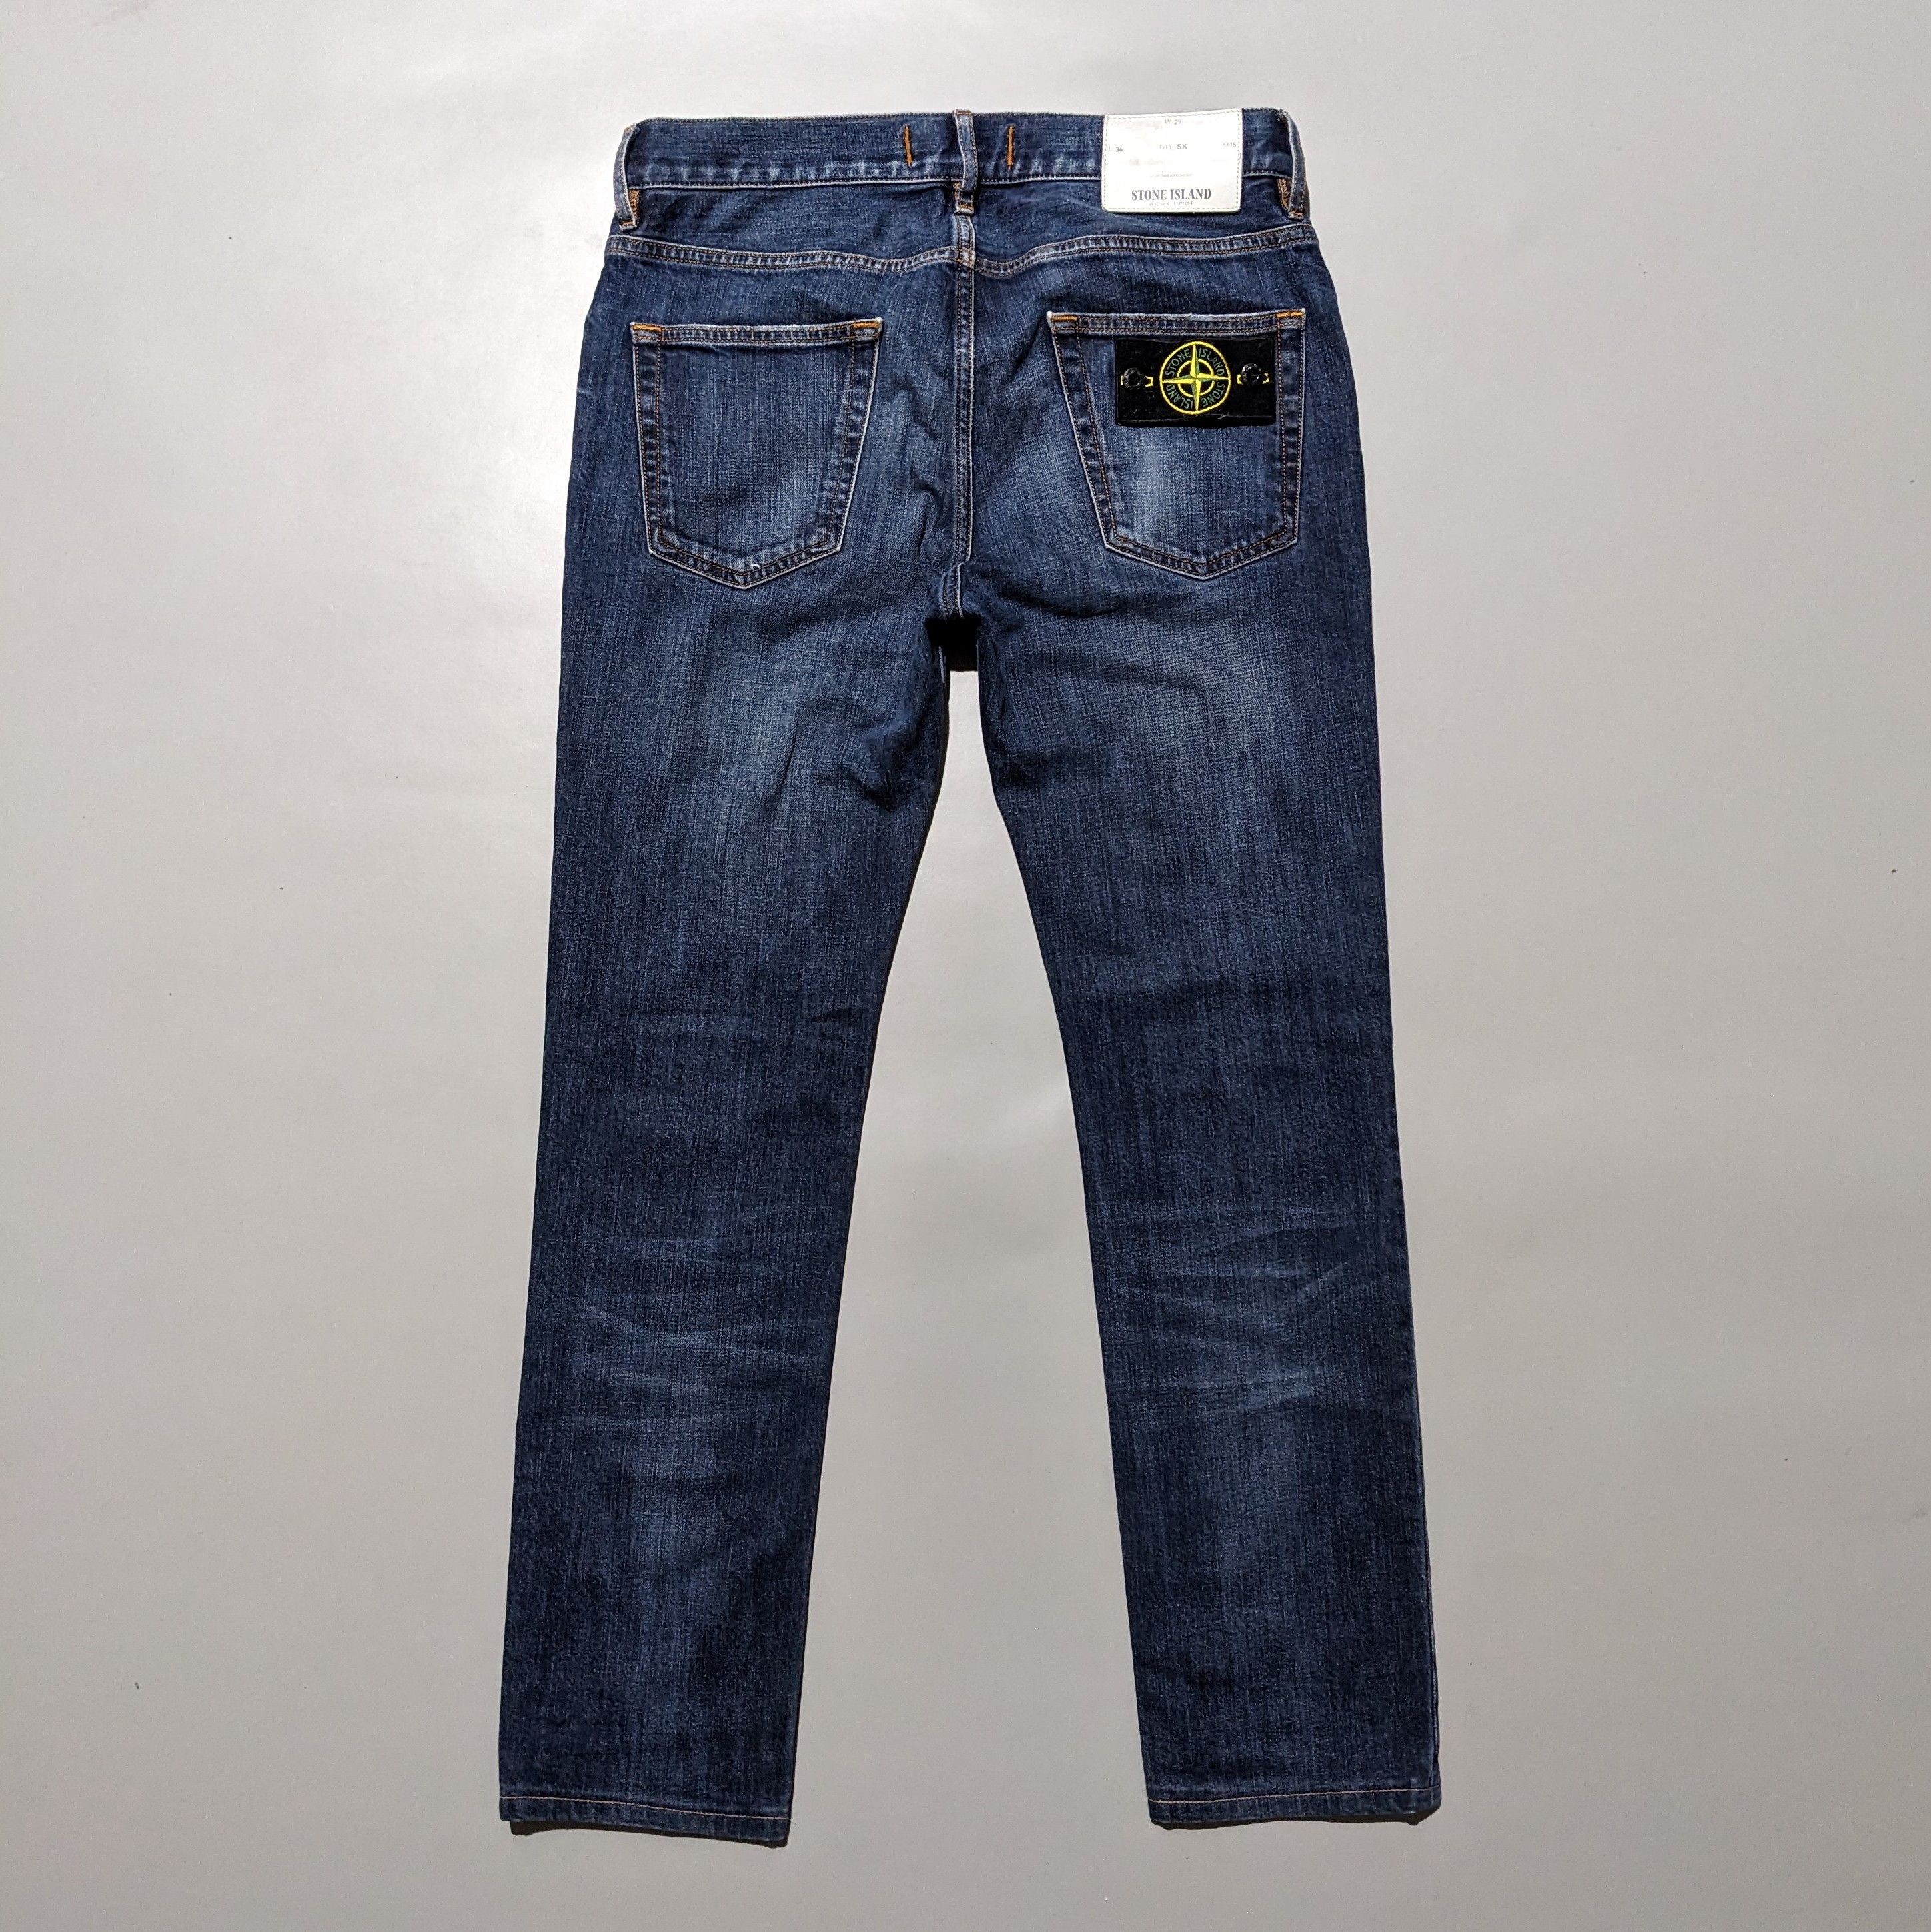 Stone Island Jeans Type Sk | Grailed